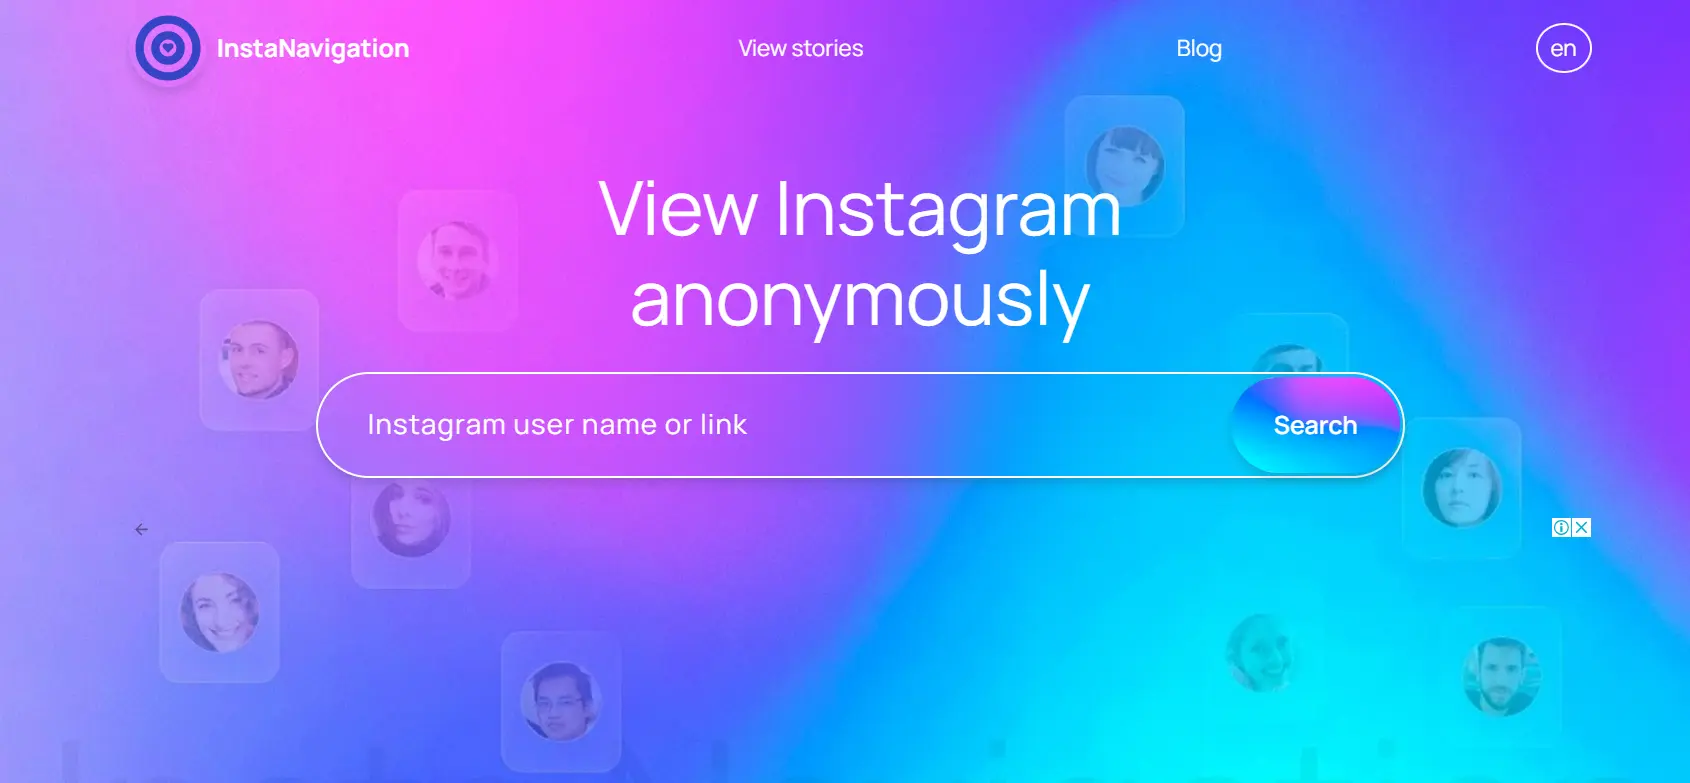 Use InstaNavigation to Anonymously Browse Instagram Stories Without Any Daily Limits